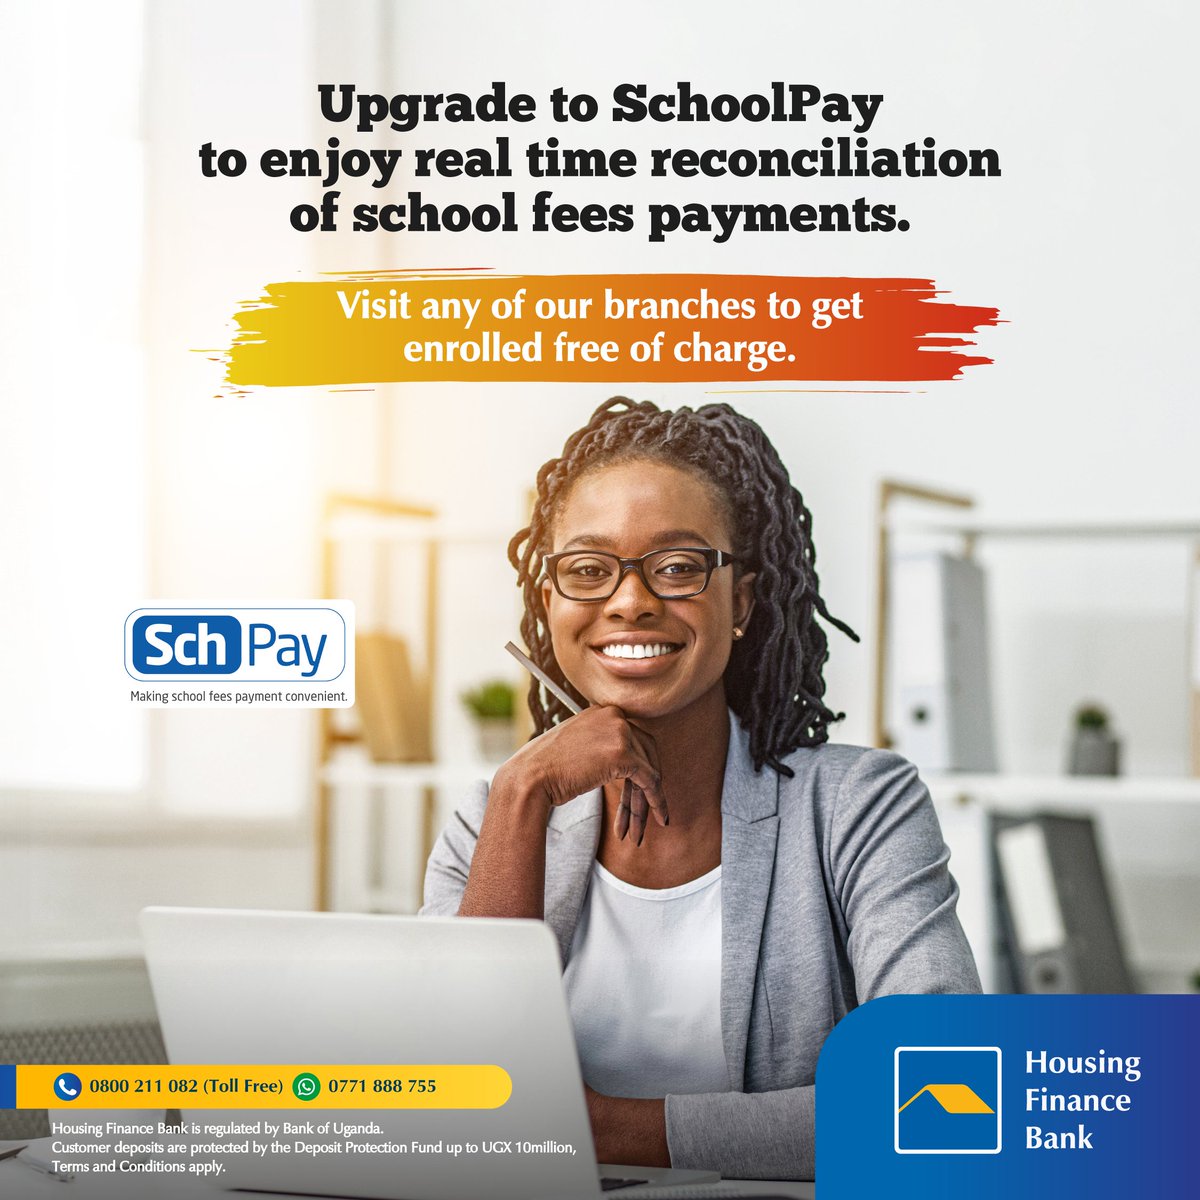 Sign up for our #SchoolPay solution to ease school fees collection for your institution. Visit any of our branches or call 0800 211 082 to get enrolled. #WeMakeItEasy